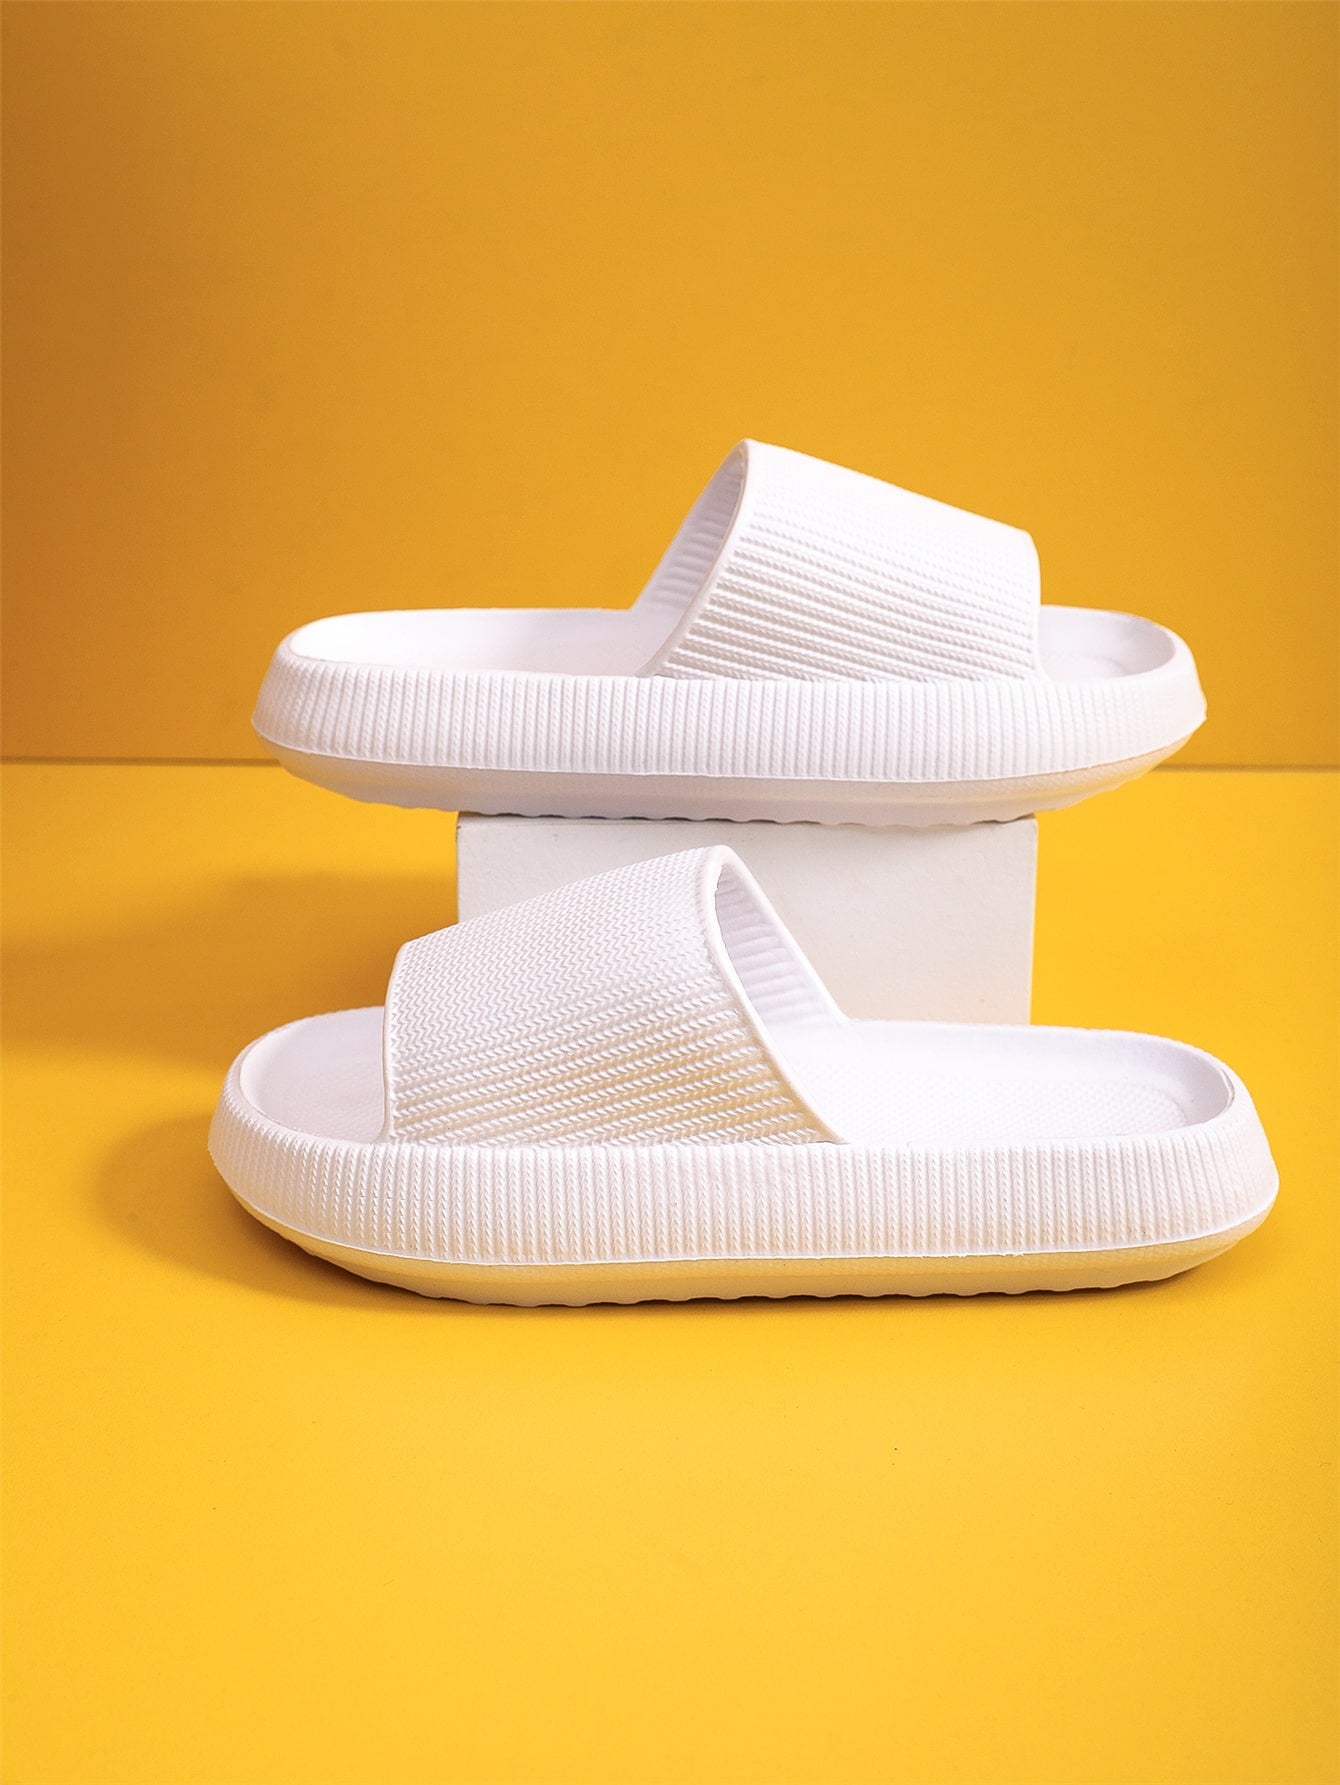 Men's INDOOR Casual Flat Slipper Sandals for Indoor Bathing and Home Use